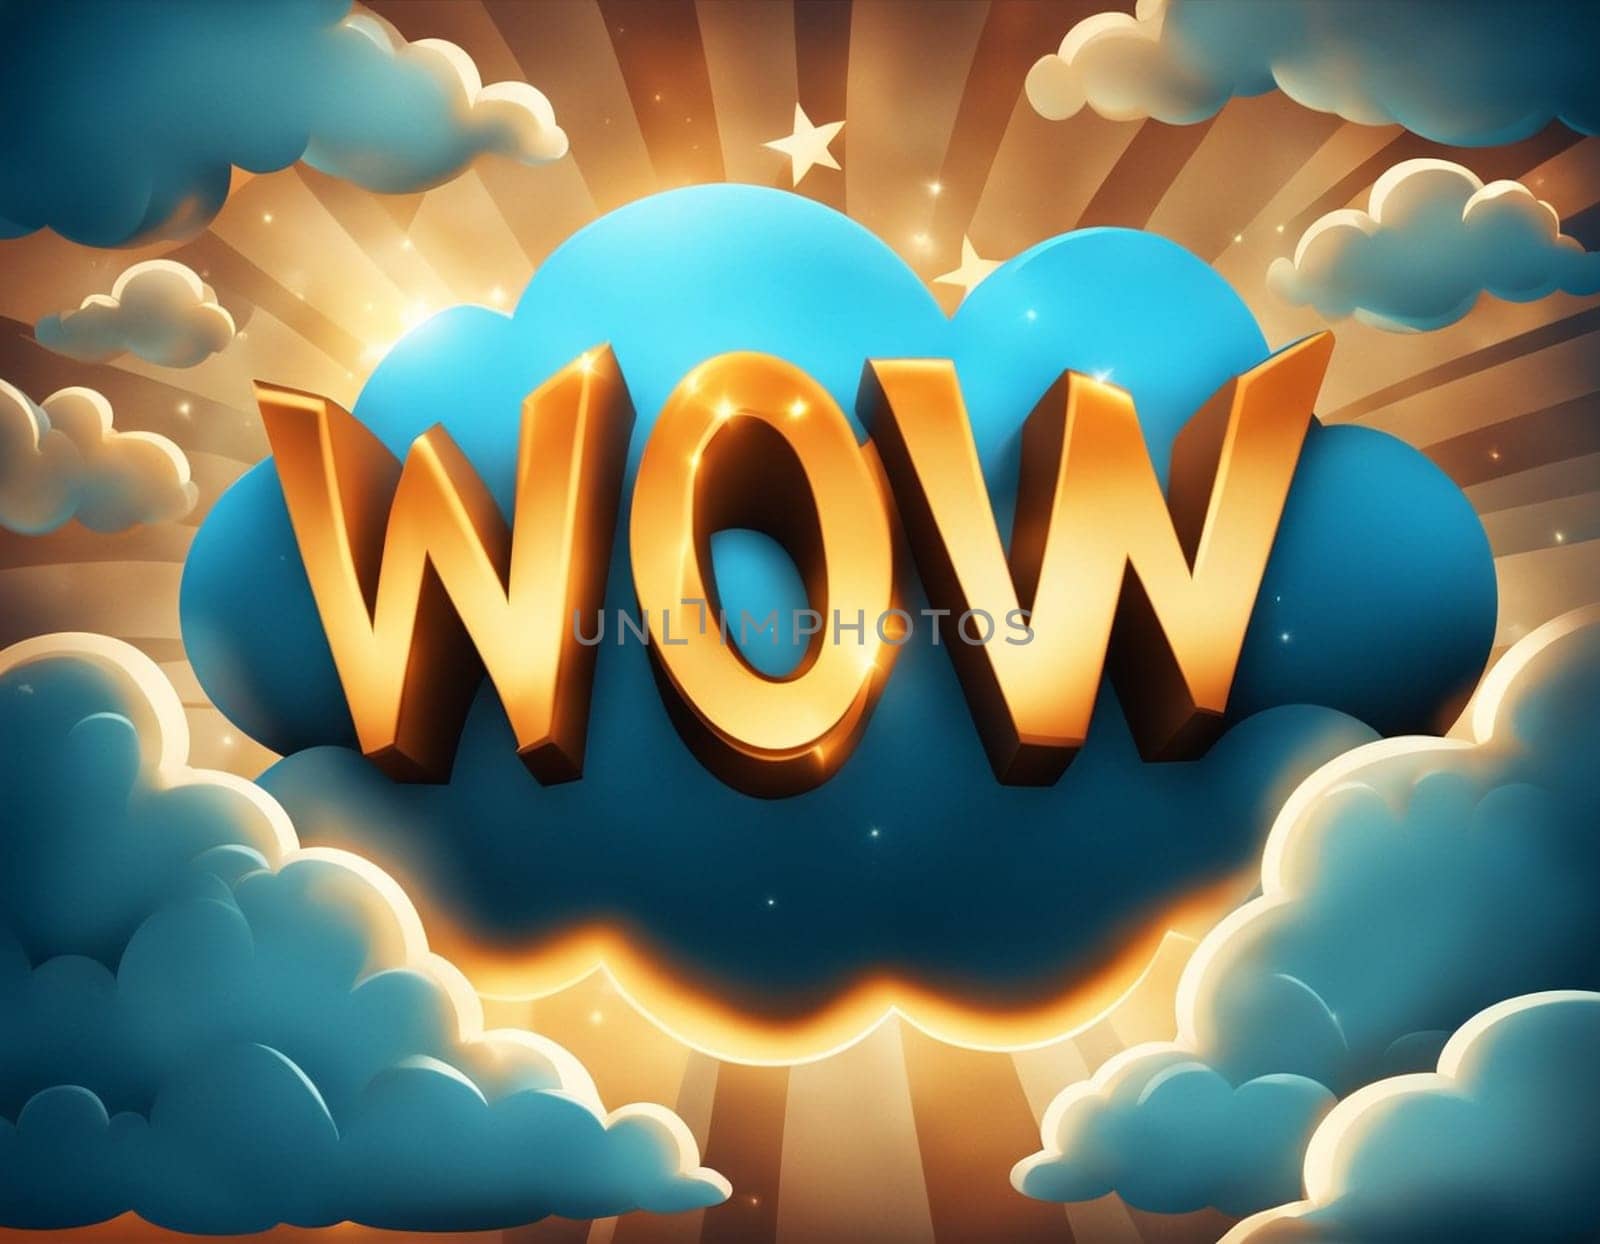 Cartoon sign of burst clouds with the word WOW. High quality illustration